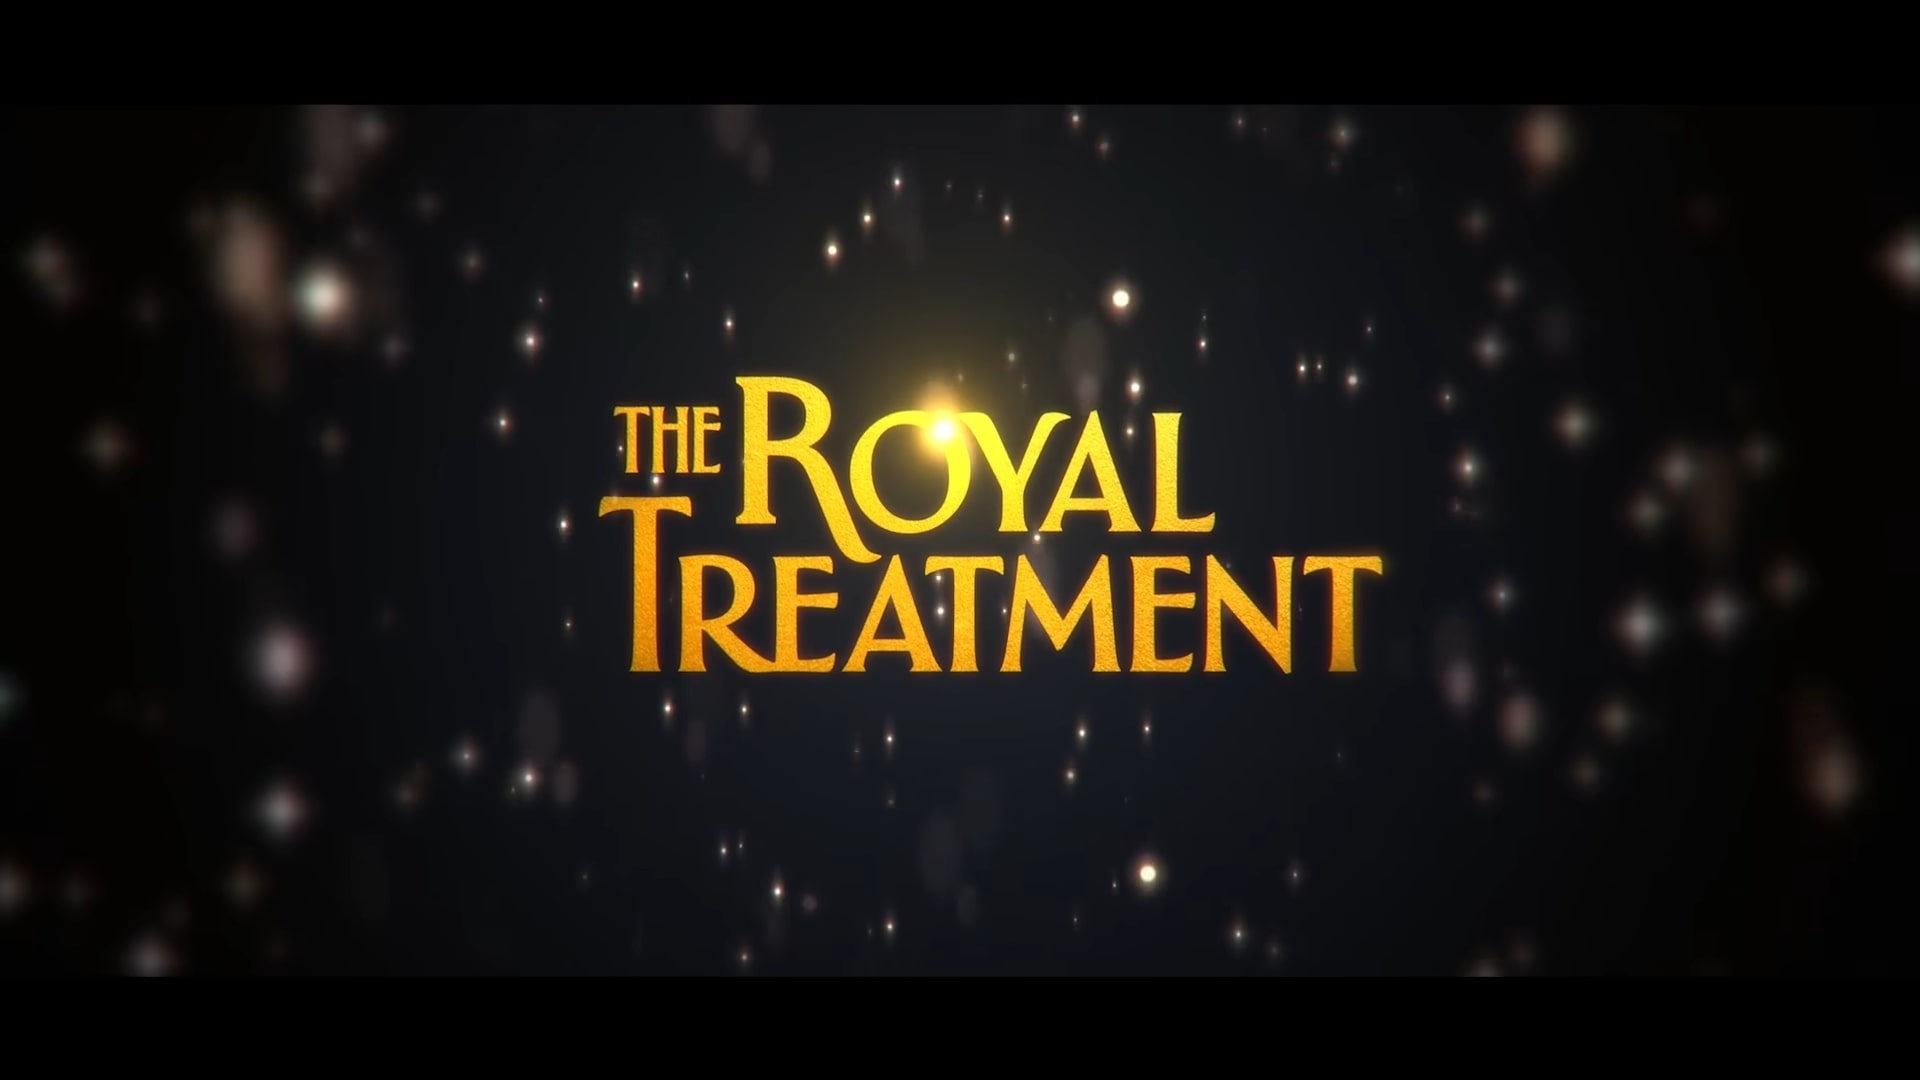 Netflix The Royal Treatment Trailer, Coming to Netflix in January 2022